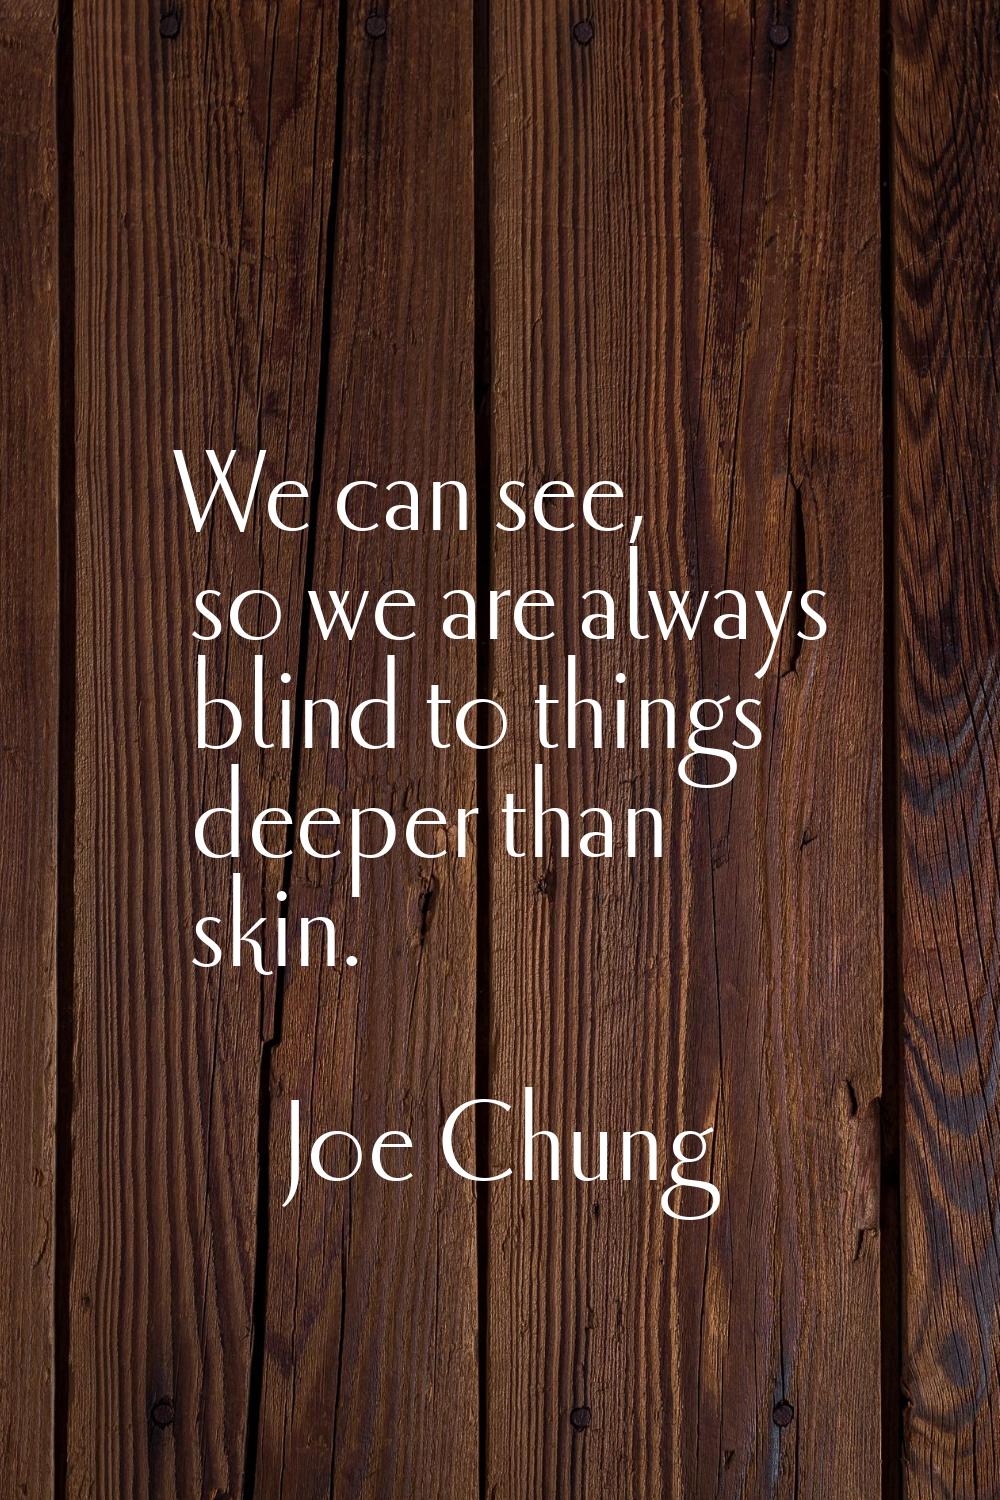 We can see, so we are always blind to things deeper than skin.